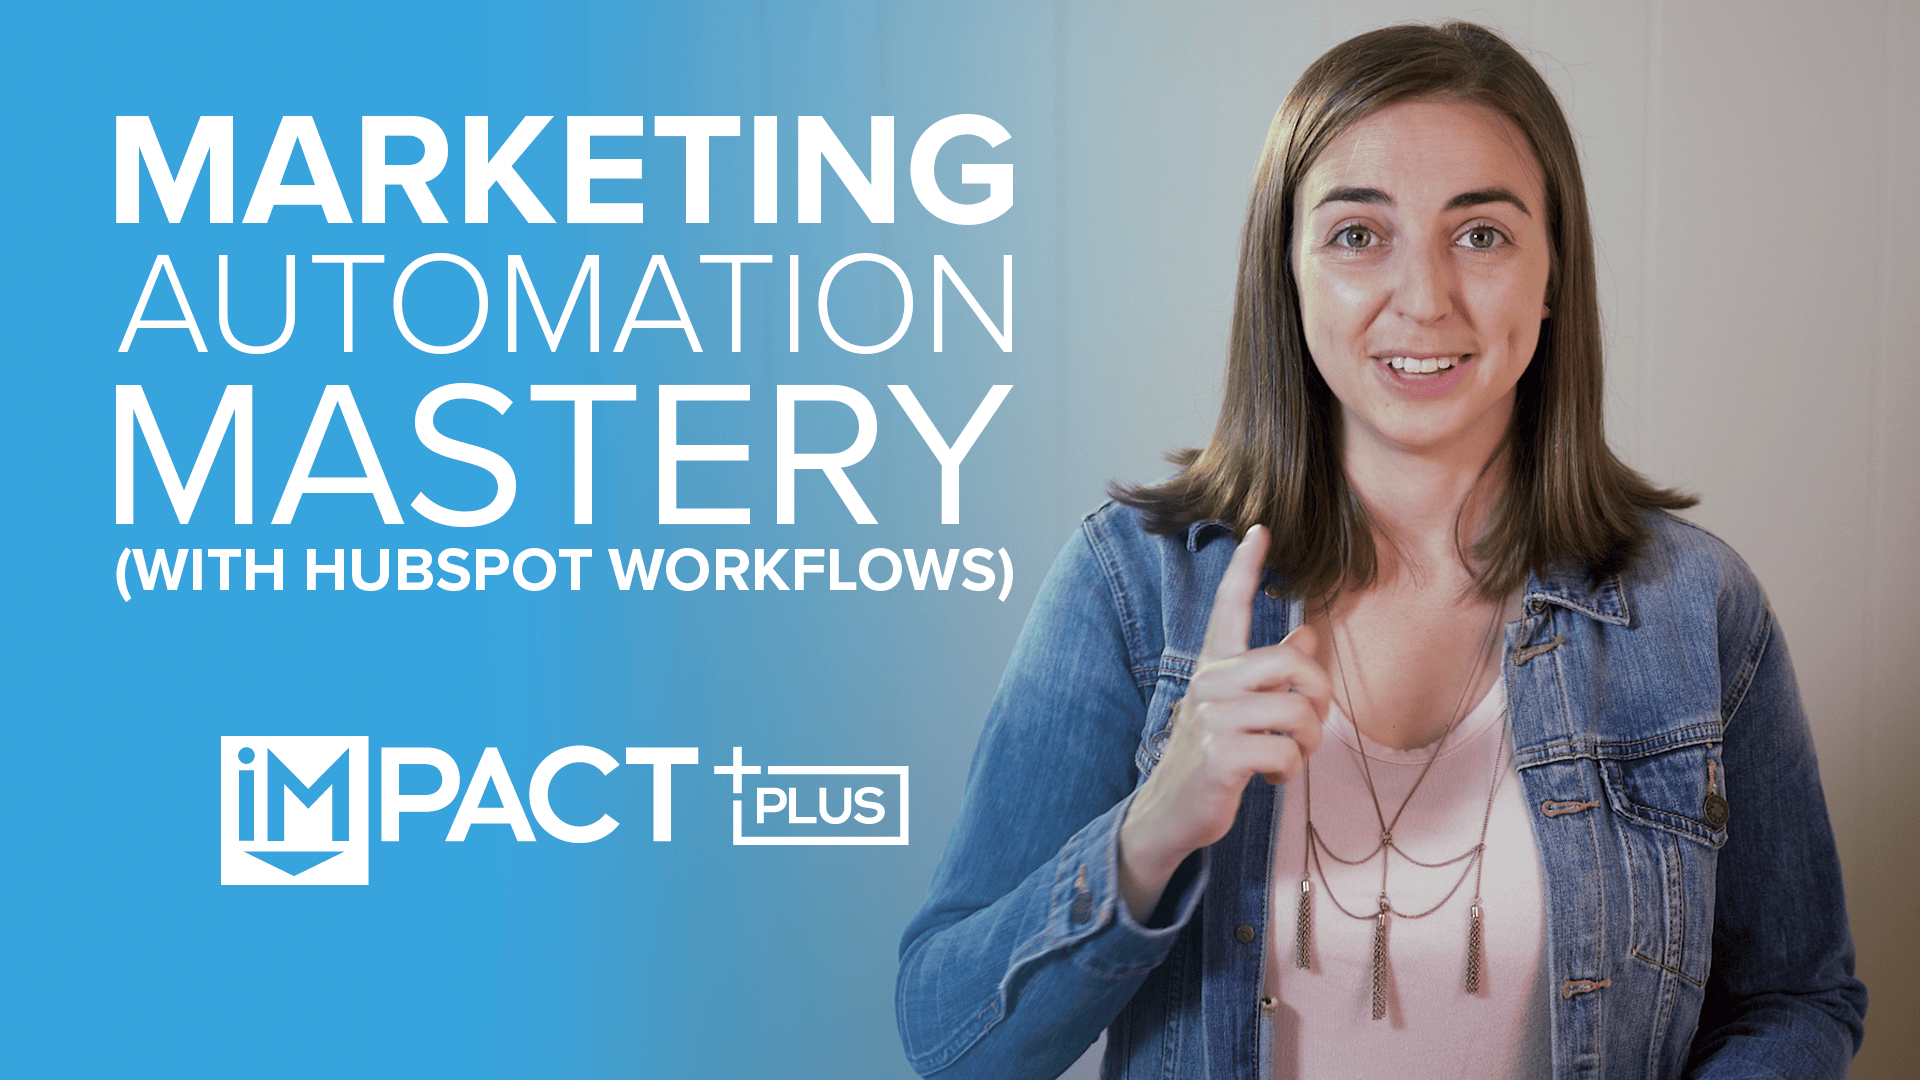 Marketing automation mastery (with HubSpot workflows)